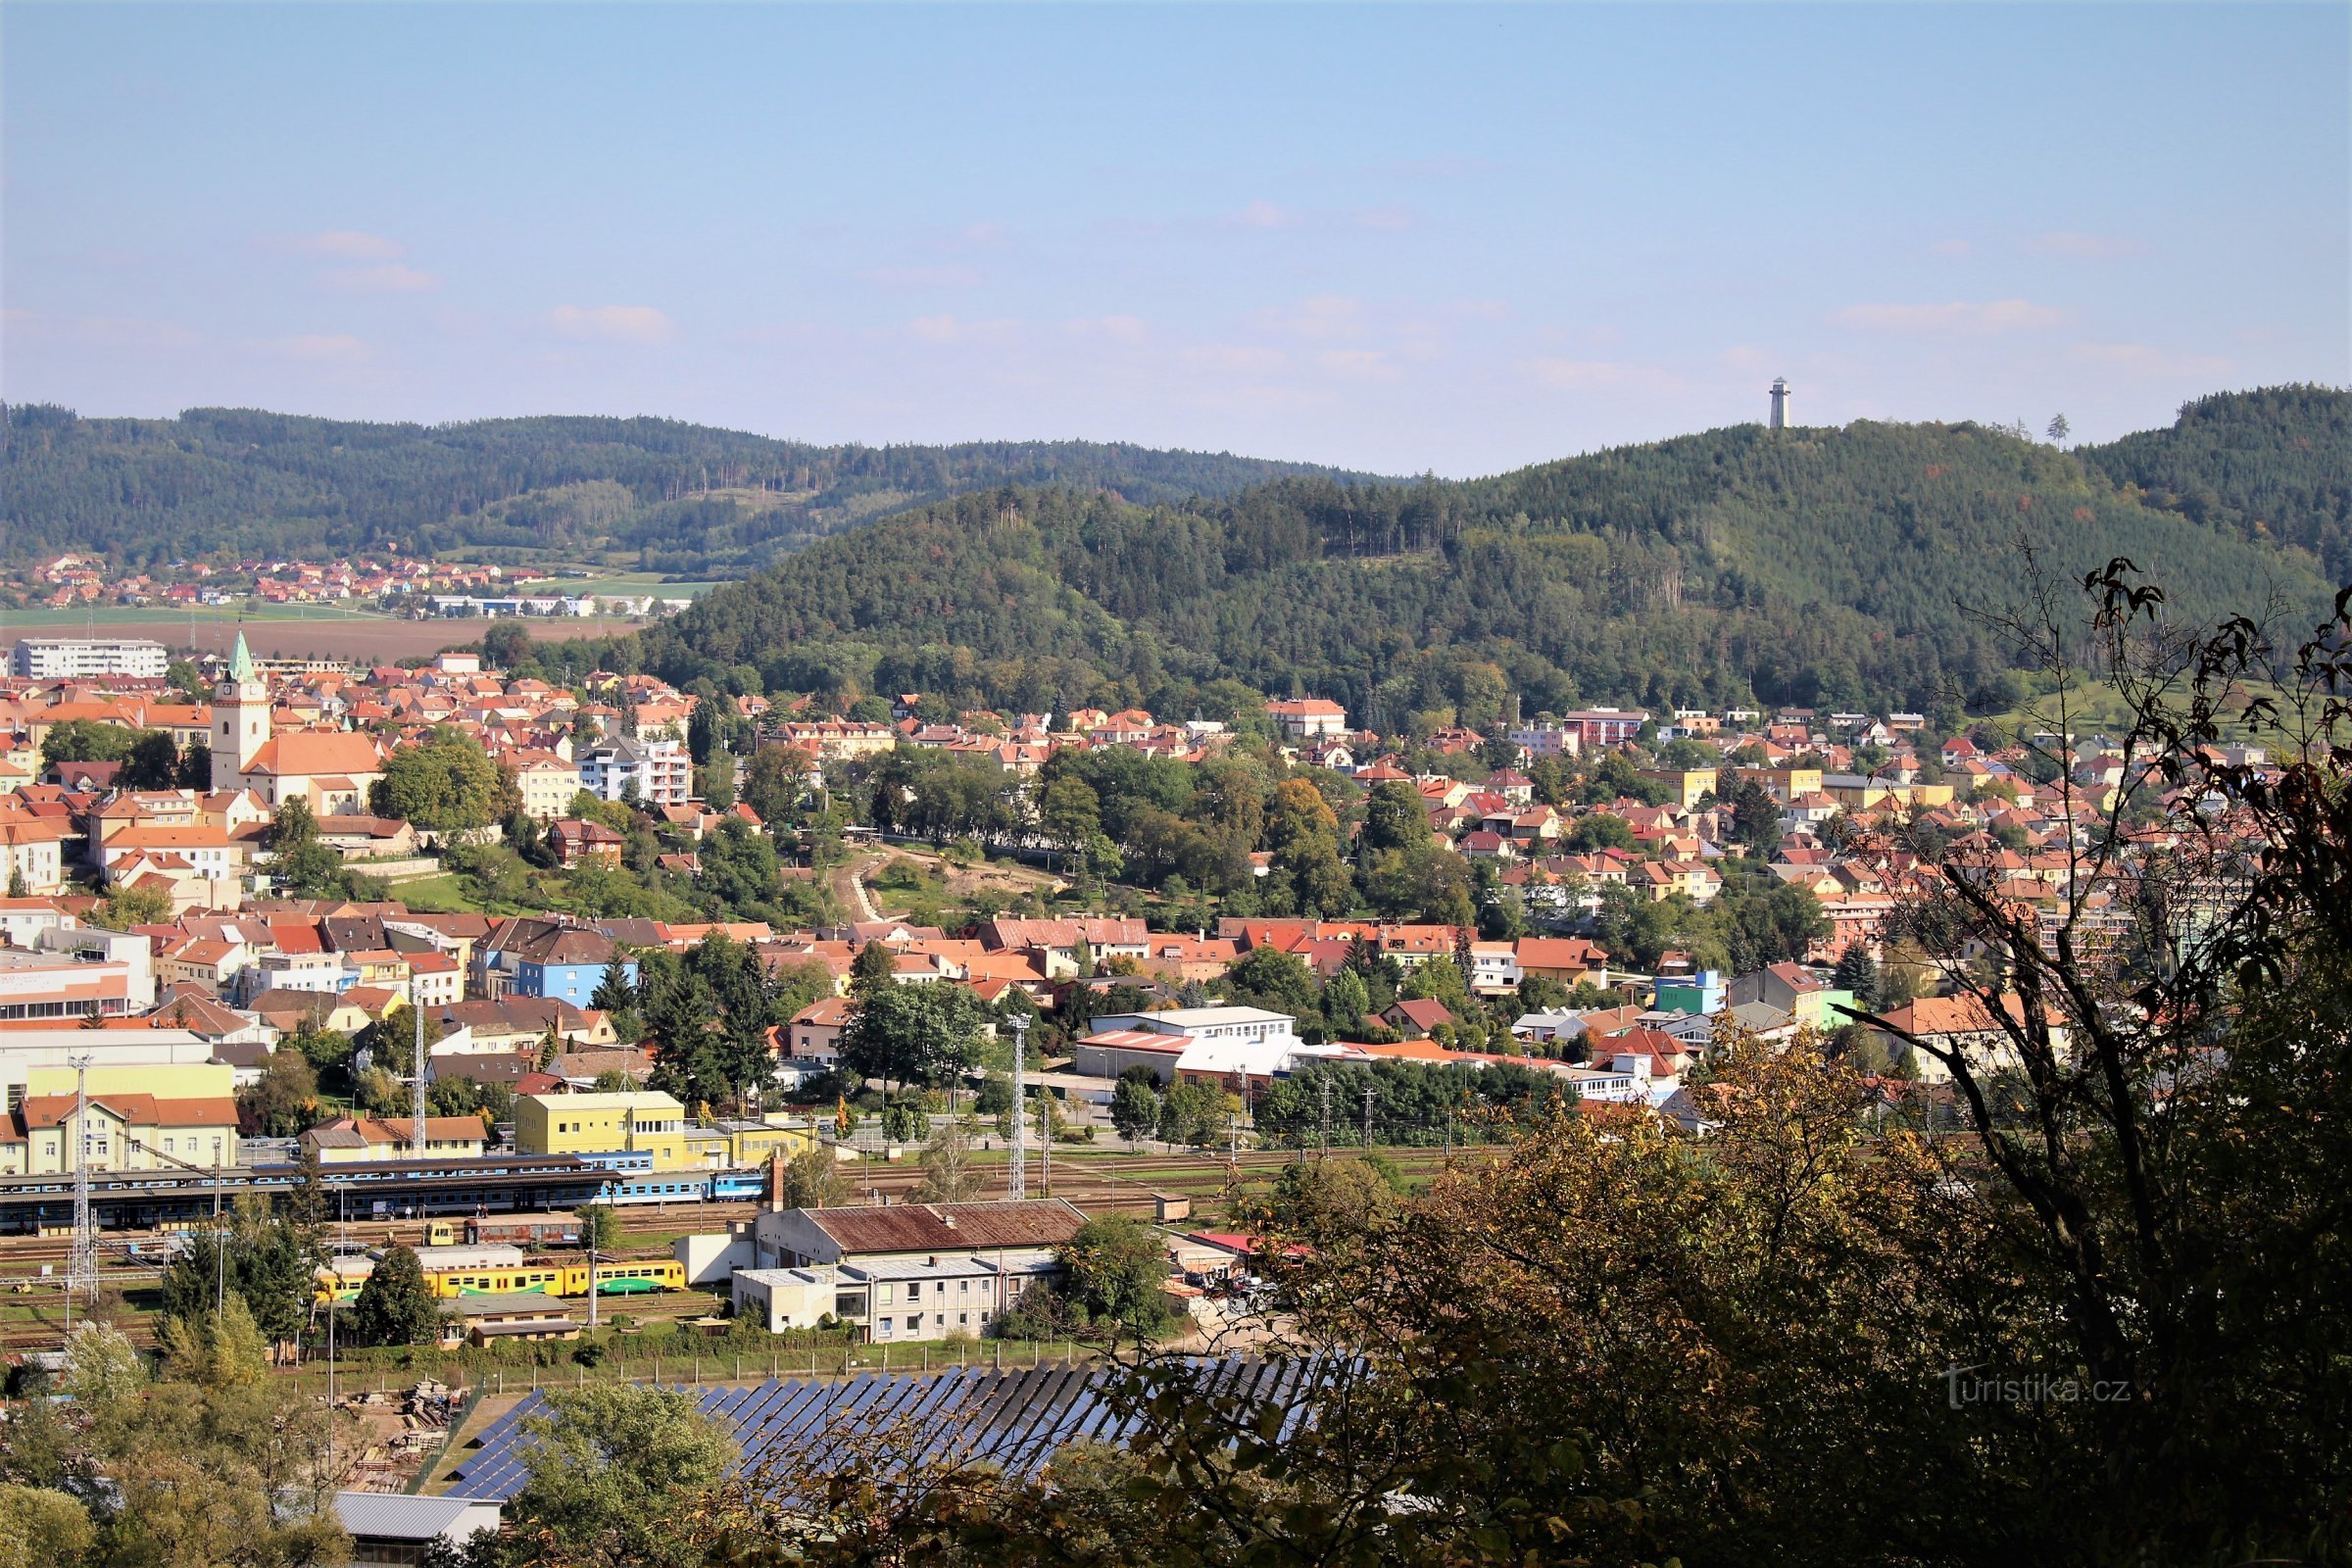 View from the viewpoint of Tišnov, in the background the lookout tower on Klucanina